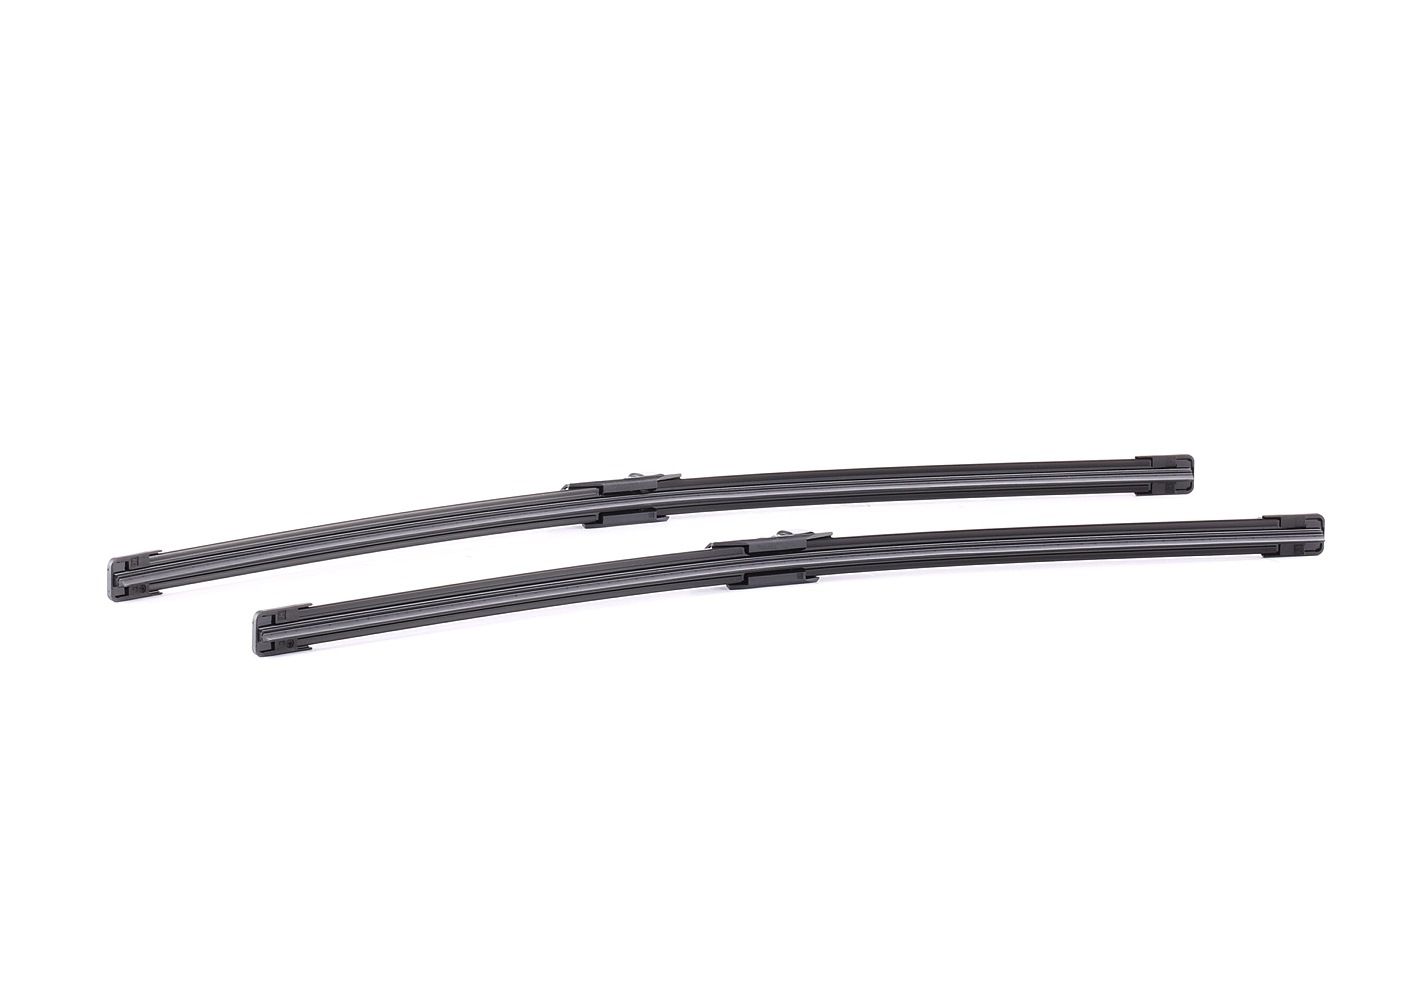 A 697 S BOSCH Aerotwin 530, 575 mm, Beam, for left-hand drive vehicles Left-/right-hand drive vehicles: for left-hand drive vehicles Wiper blades 3 397 007 697 buy